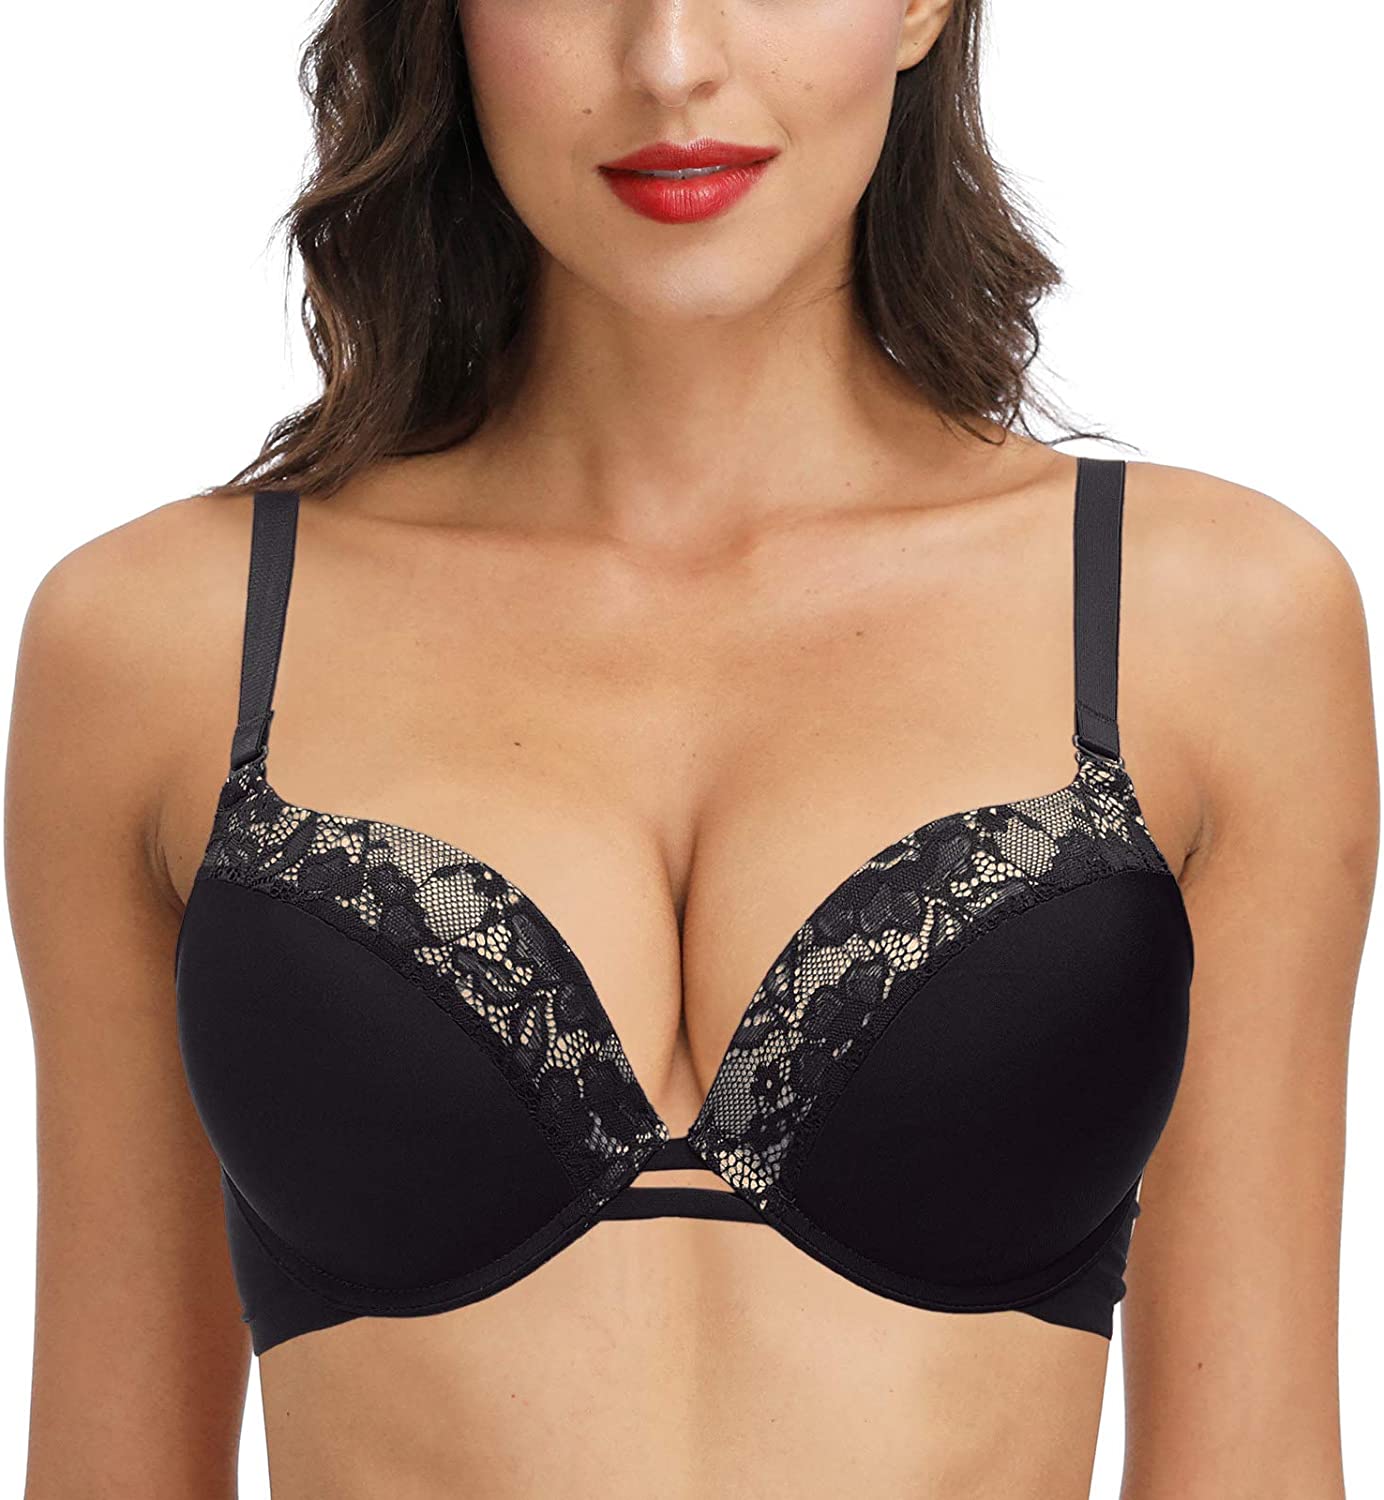 Low Neck-line Padded Bra for Small Chests - Plusexy Padded ‘Add One Cup’ Underwire Plunge Bra